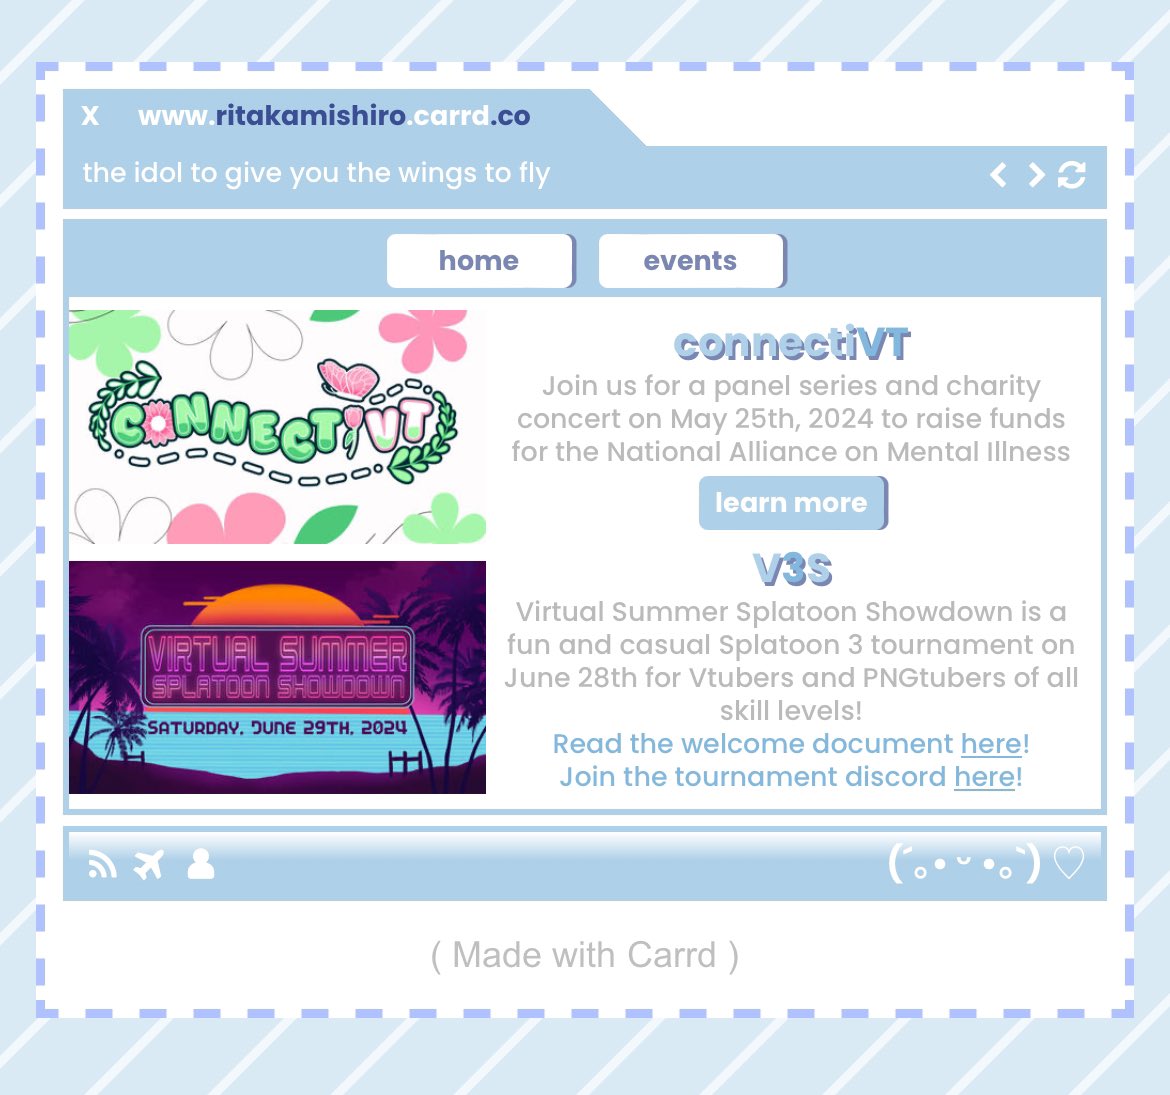 I made a carrd so you can easily find my event information and more!! 

It’s very bare bones since I just made it, but maybe I’ll add more stuff in the future!! :D